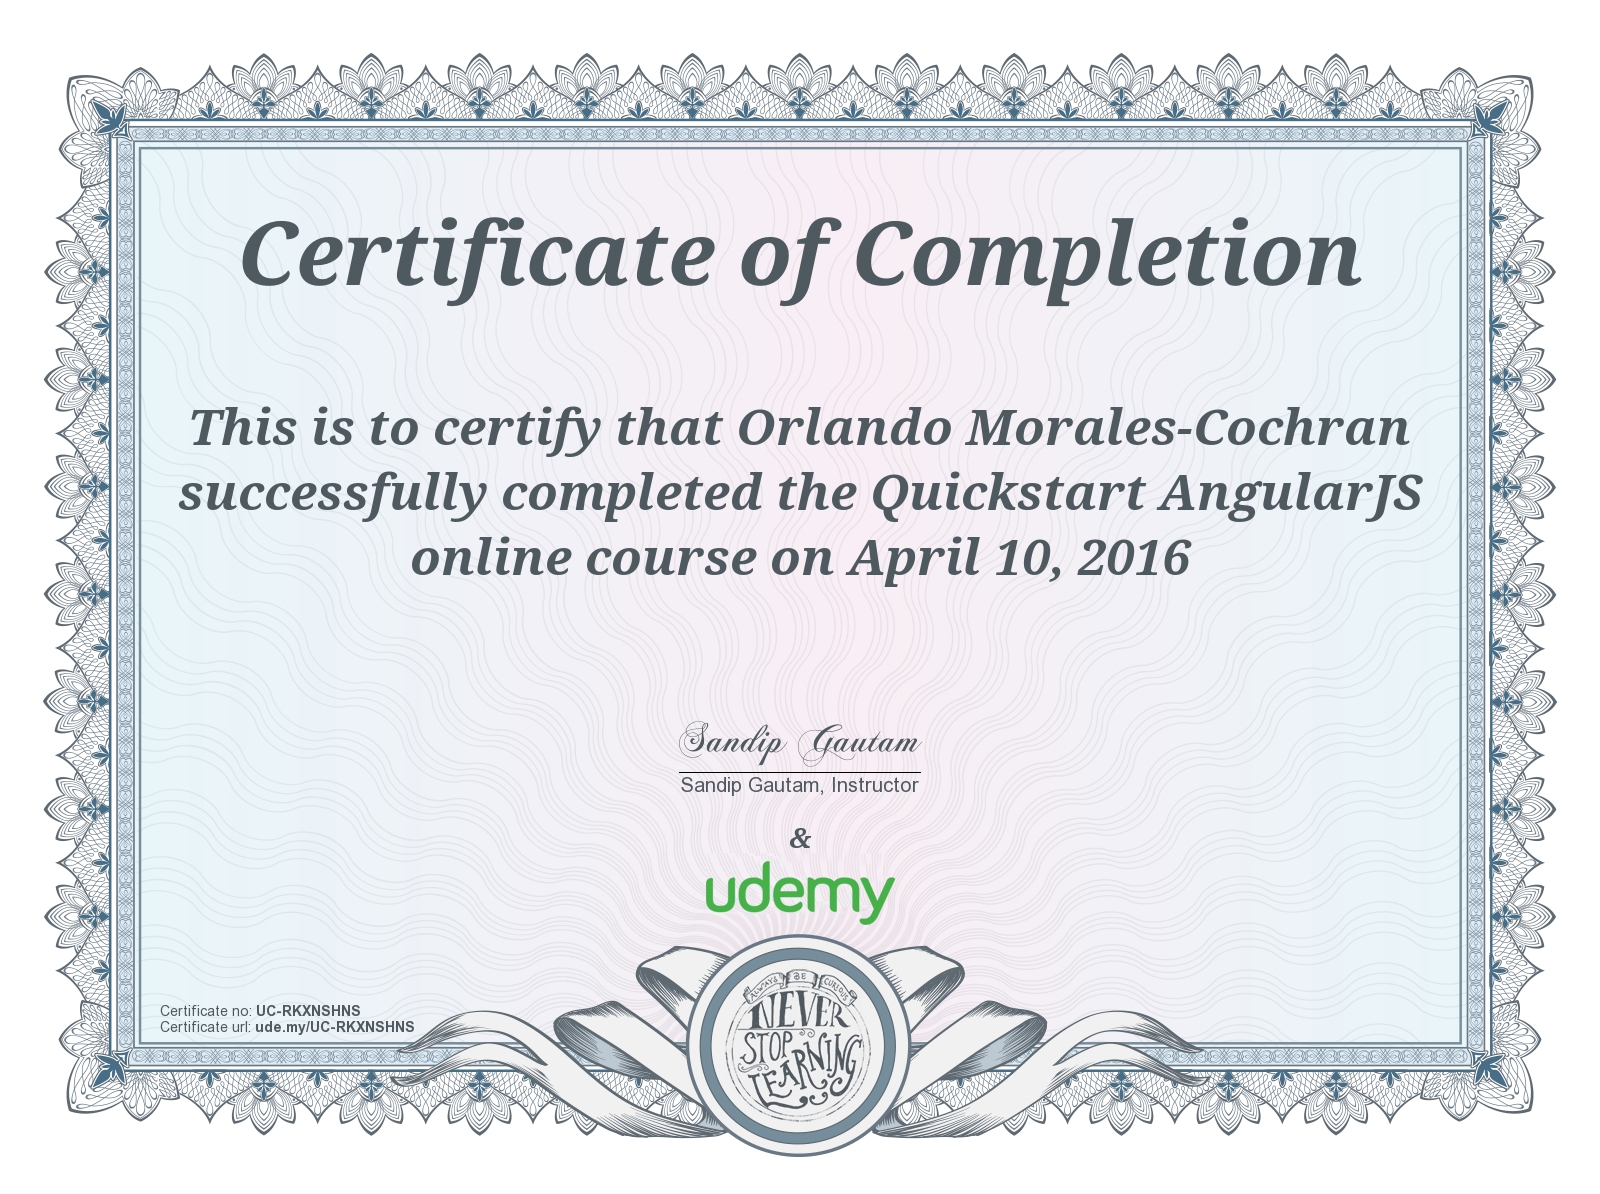 Udemy - Quickstart AngularJS Certificate of Course Completion